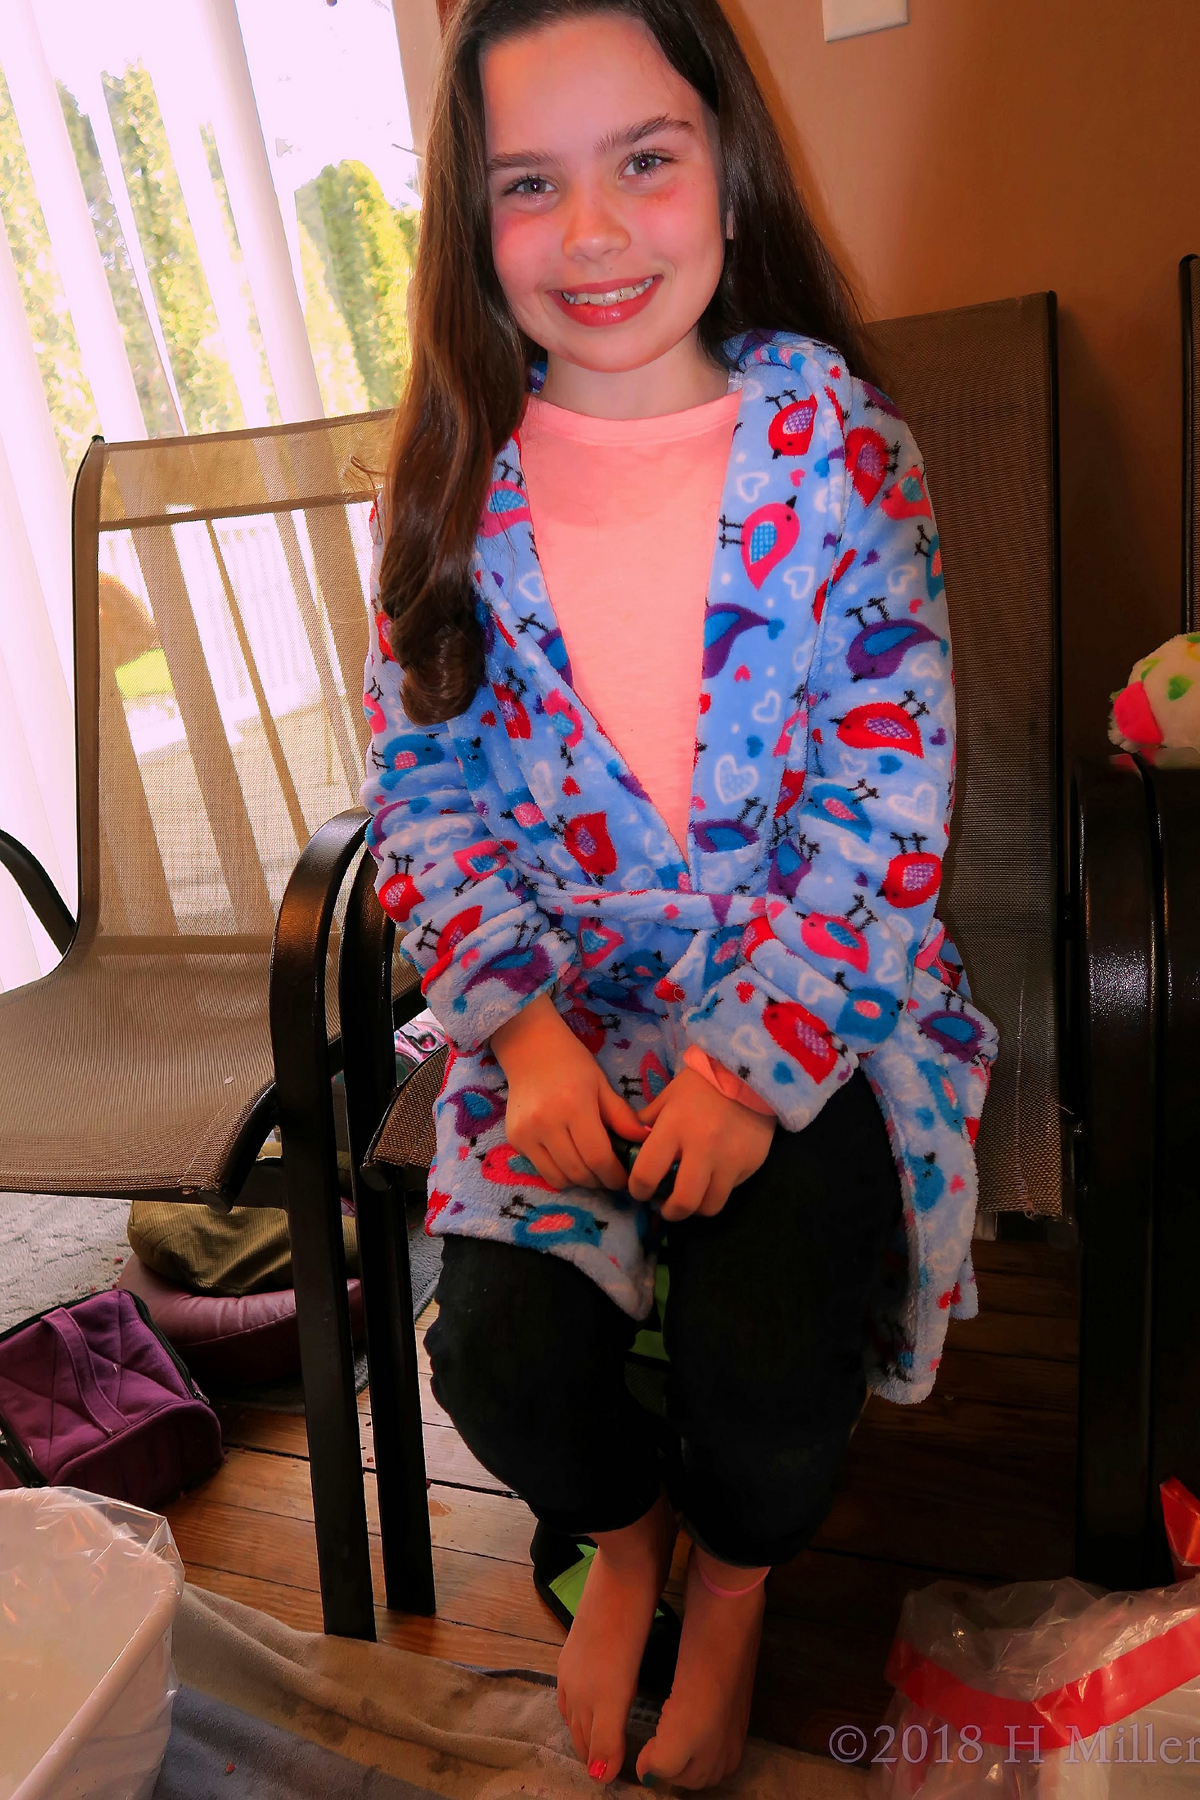 Posing With Her Completed Kids Pedicure In A Kids Spa Robe! 